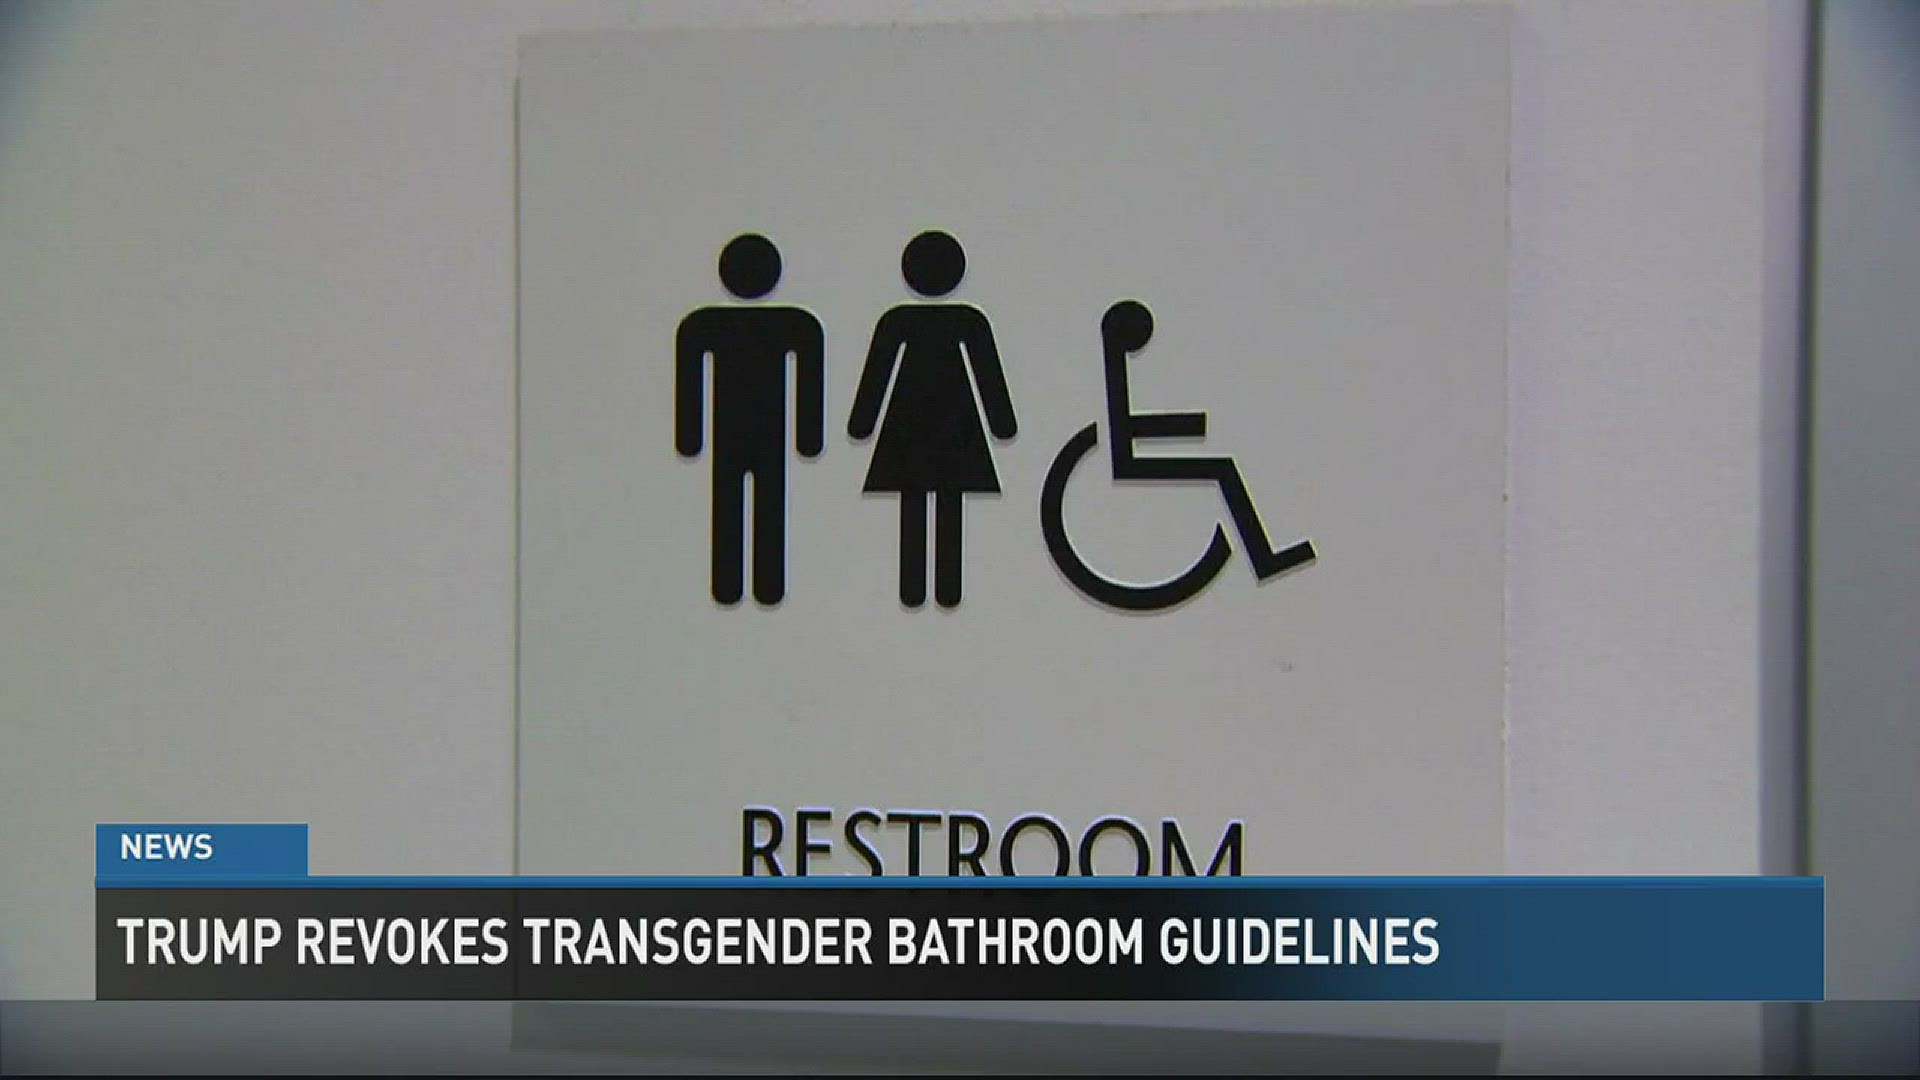 The Trump administration has lifted federal guidelines that said transgender students should be allowed to use public school bathrooms and locker rooms matching their chosen gender identity.